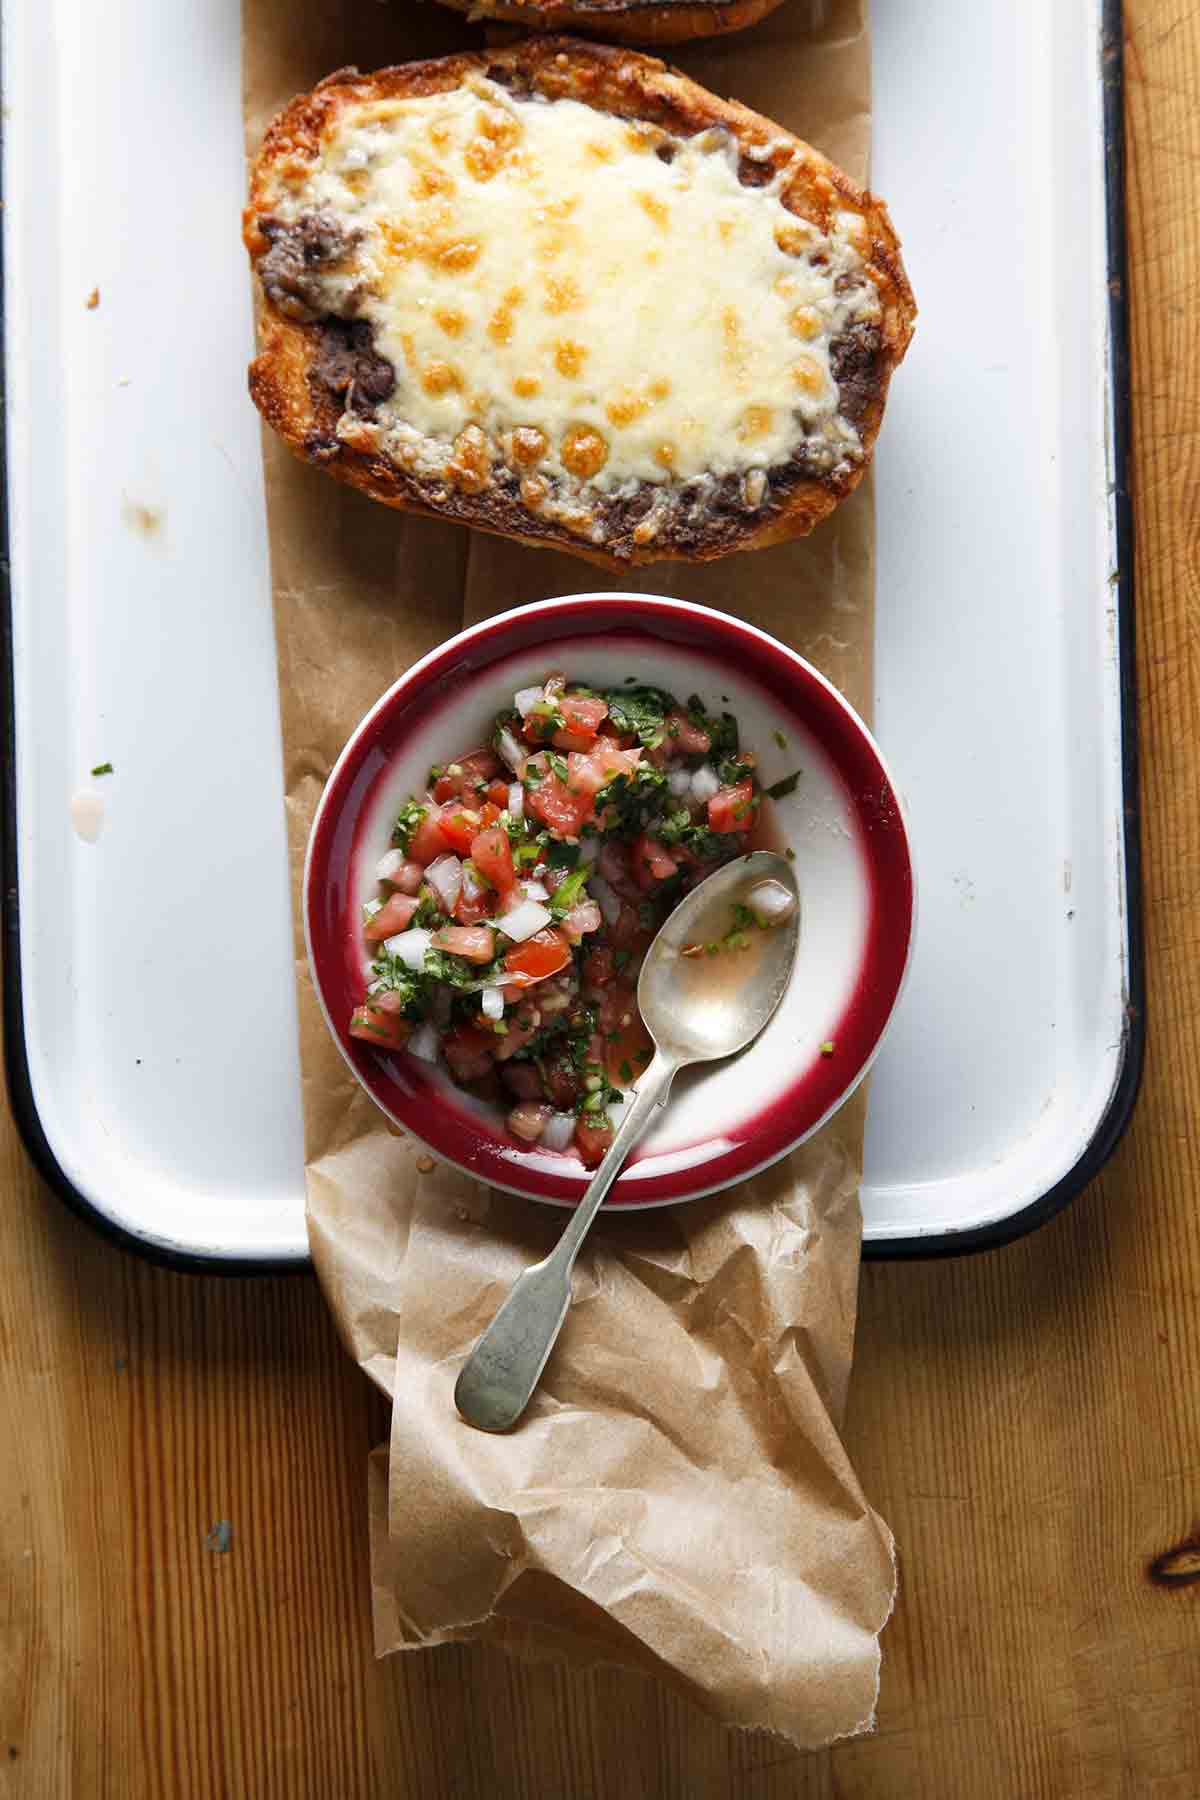 Two people reaching for traditional molletes on a platter with a bowl of salsa in the middle.